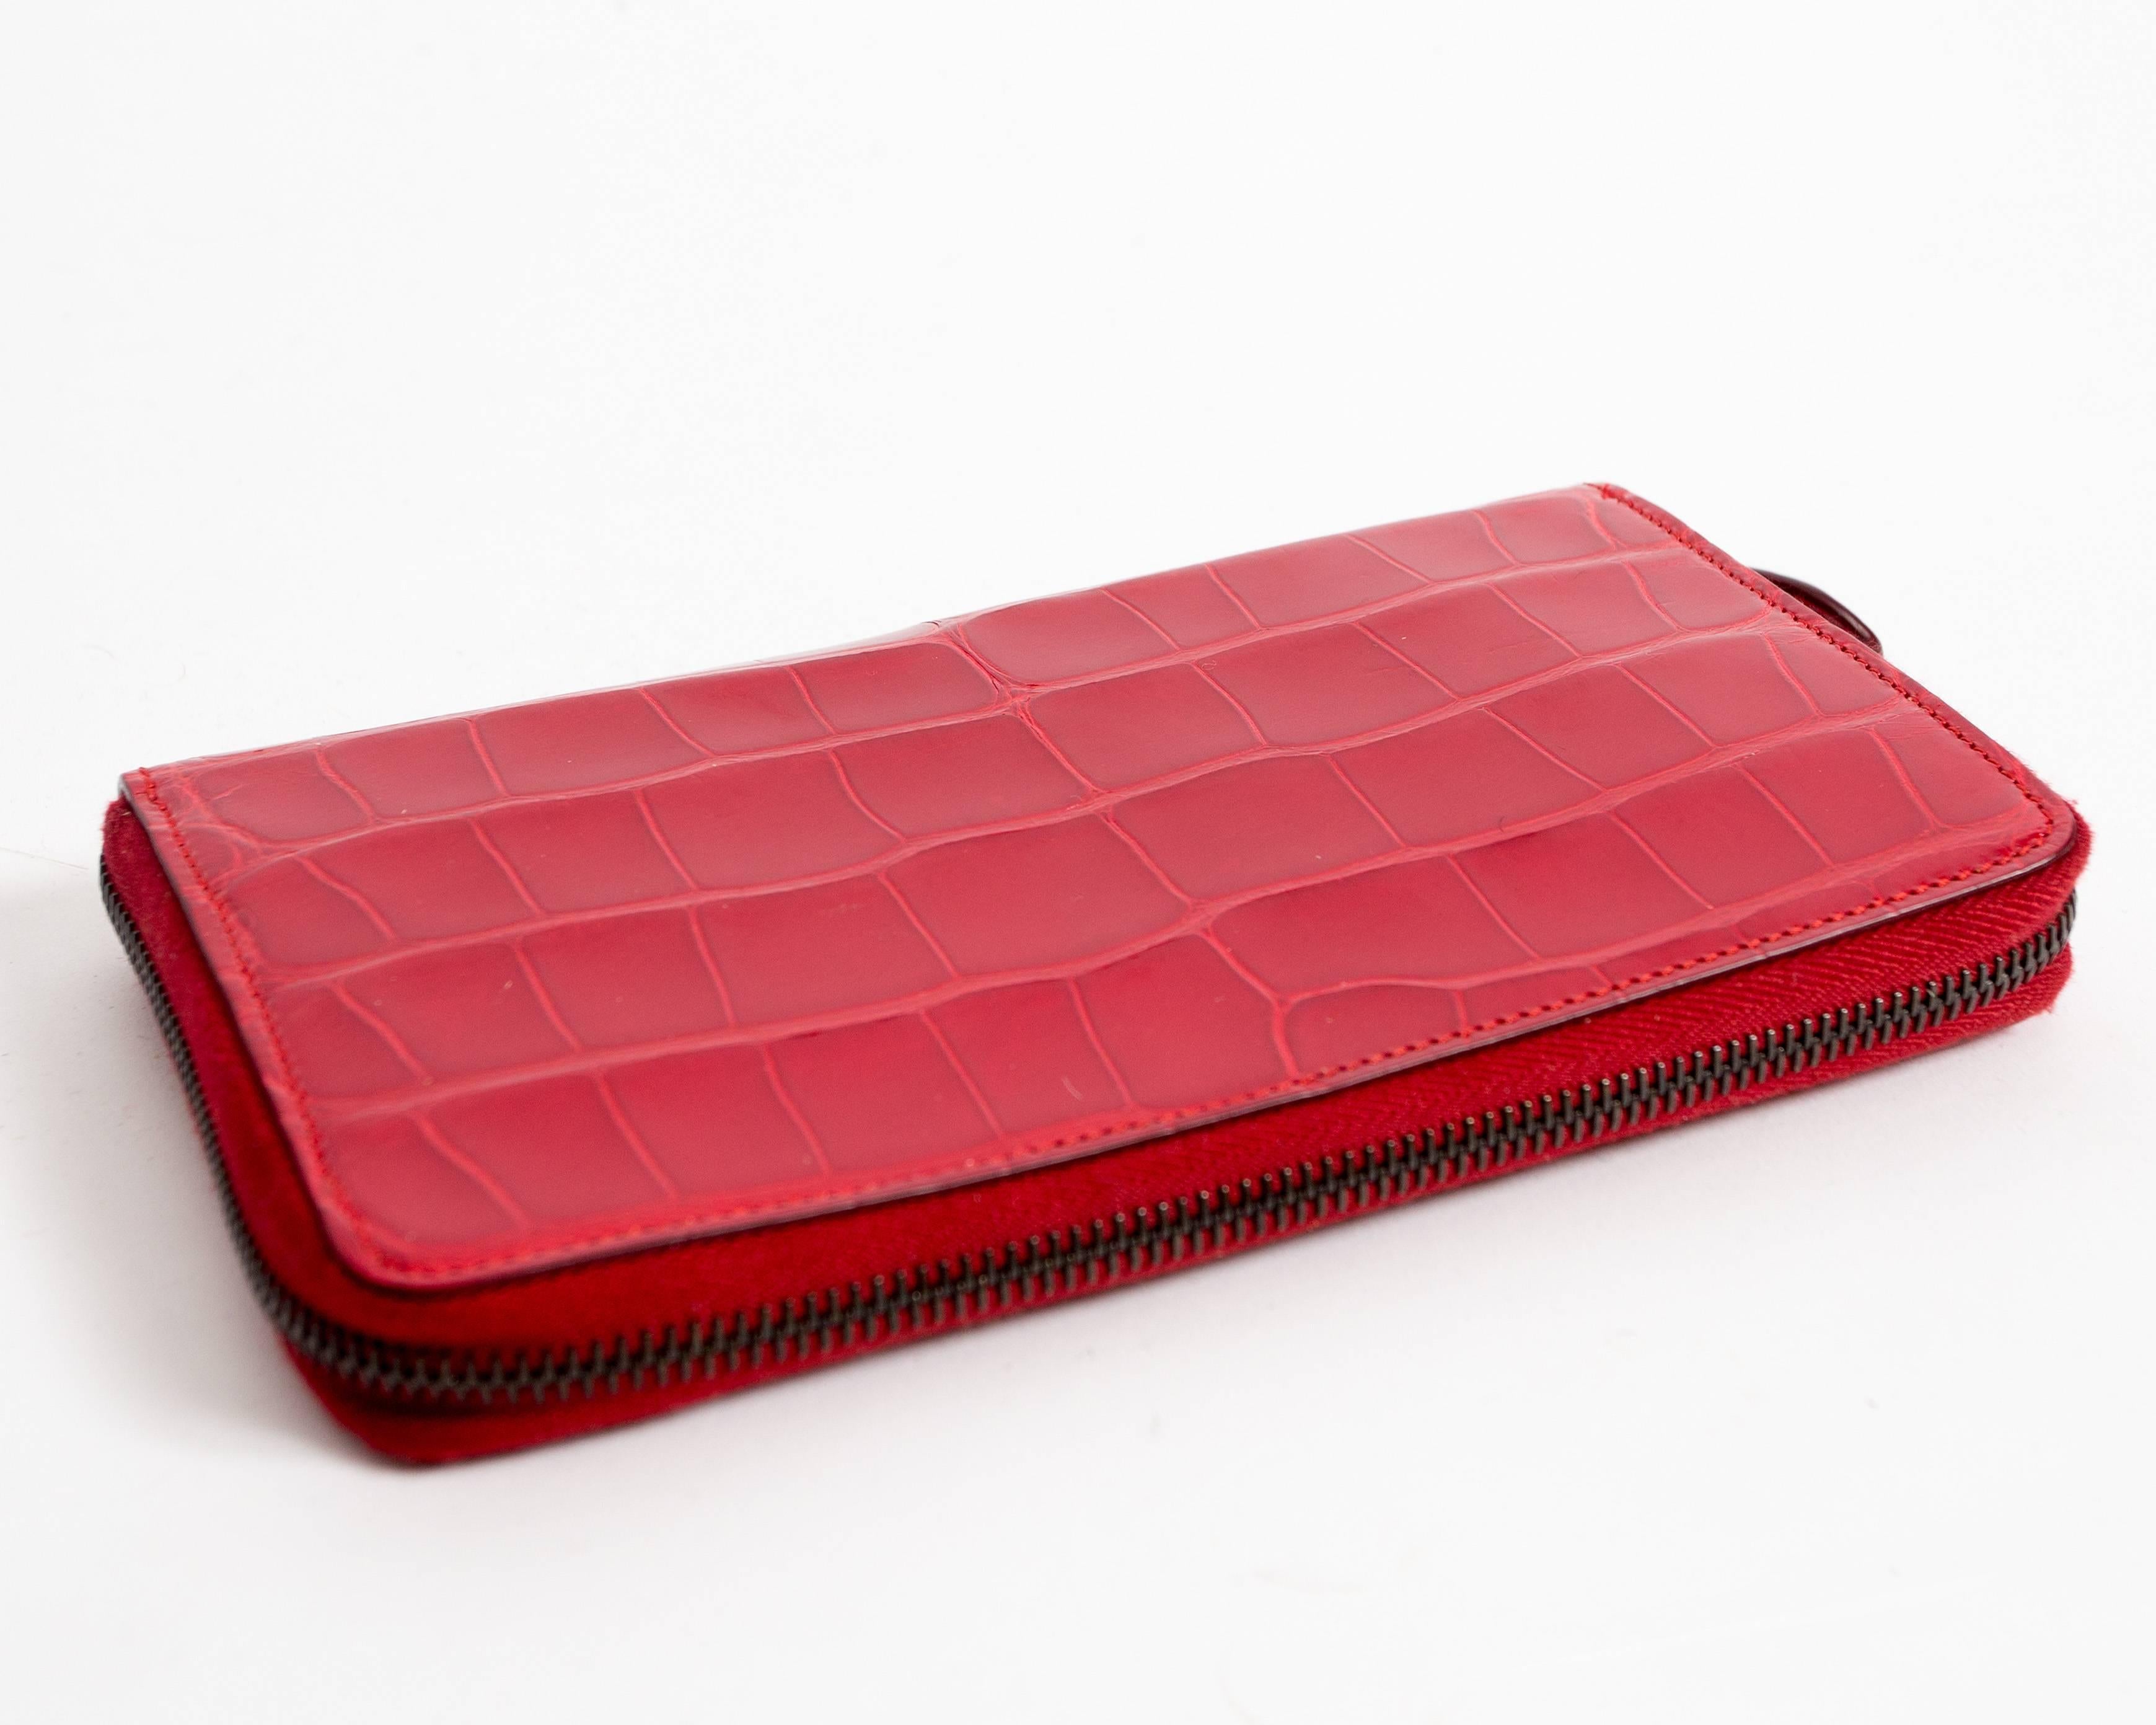 Red patent leather croc-embossed wallet from Alaia. The wallet has a gunmetal zip closure, tan leather lining. Two large compartments, an internal zipped pocket, and 6 card slots. 